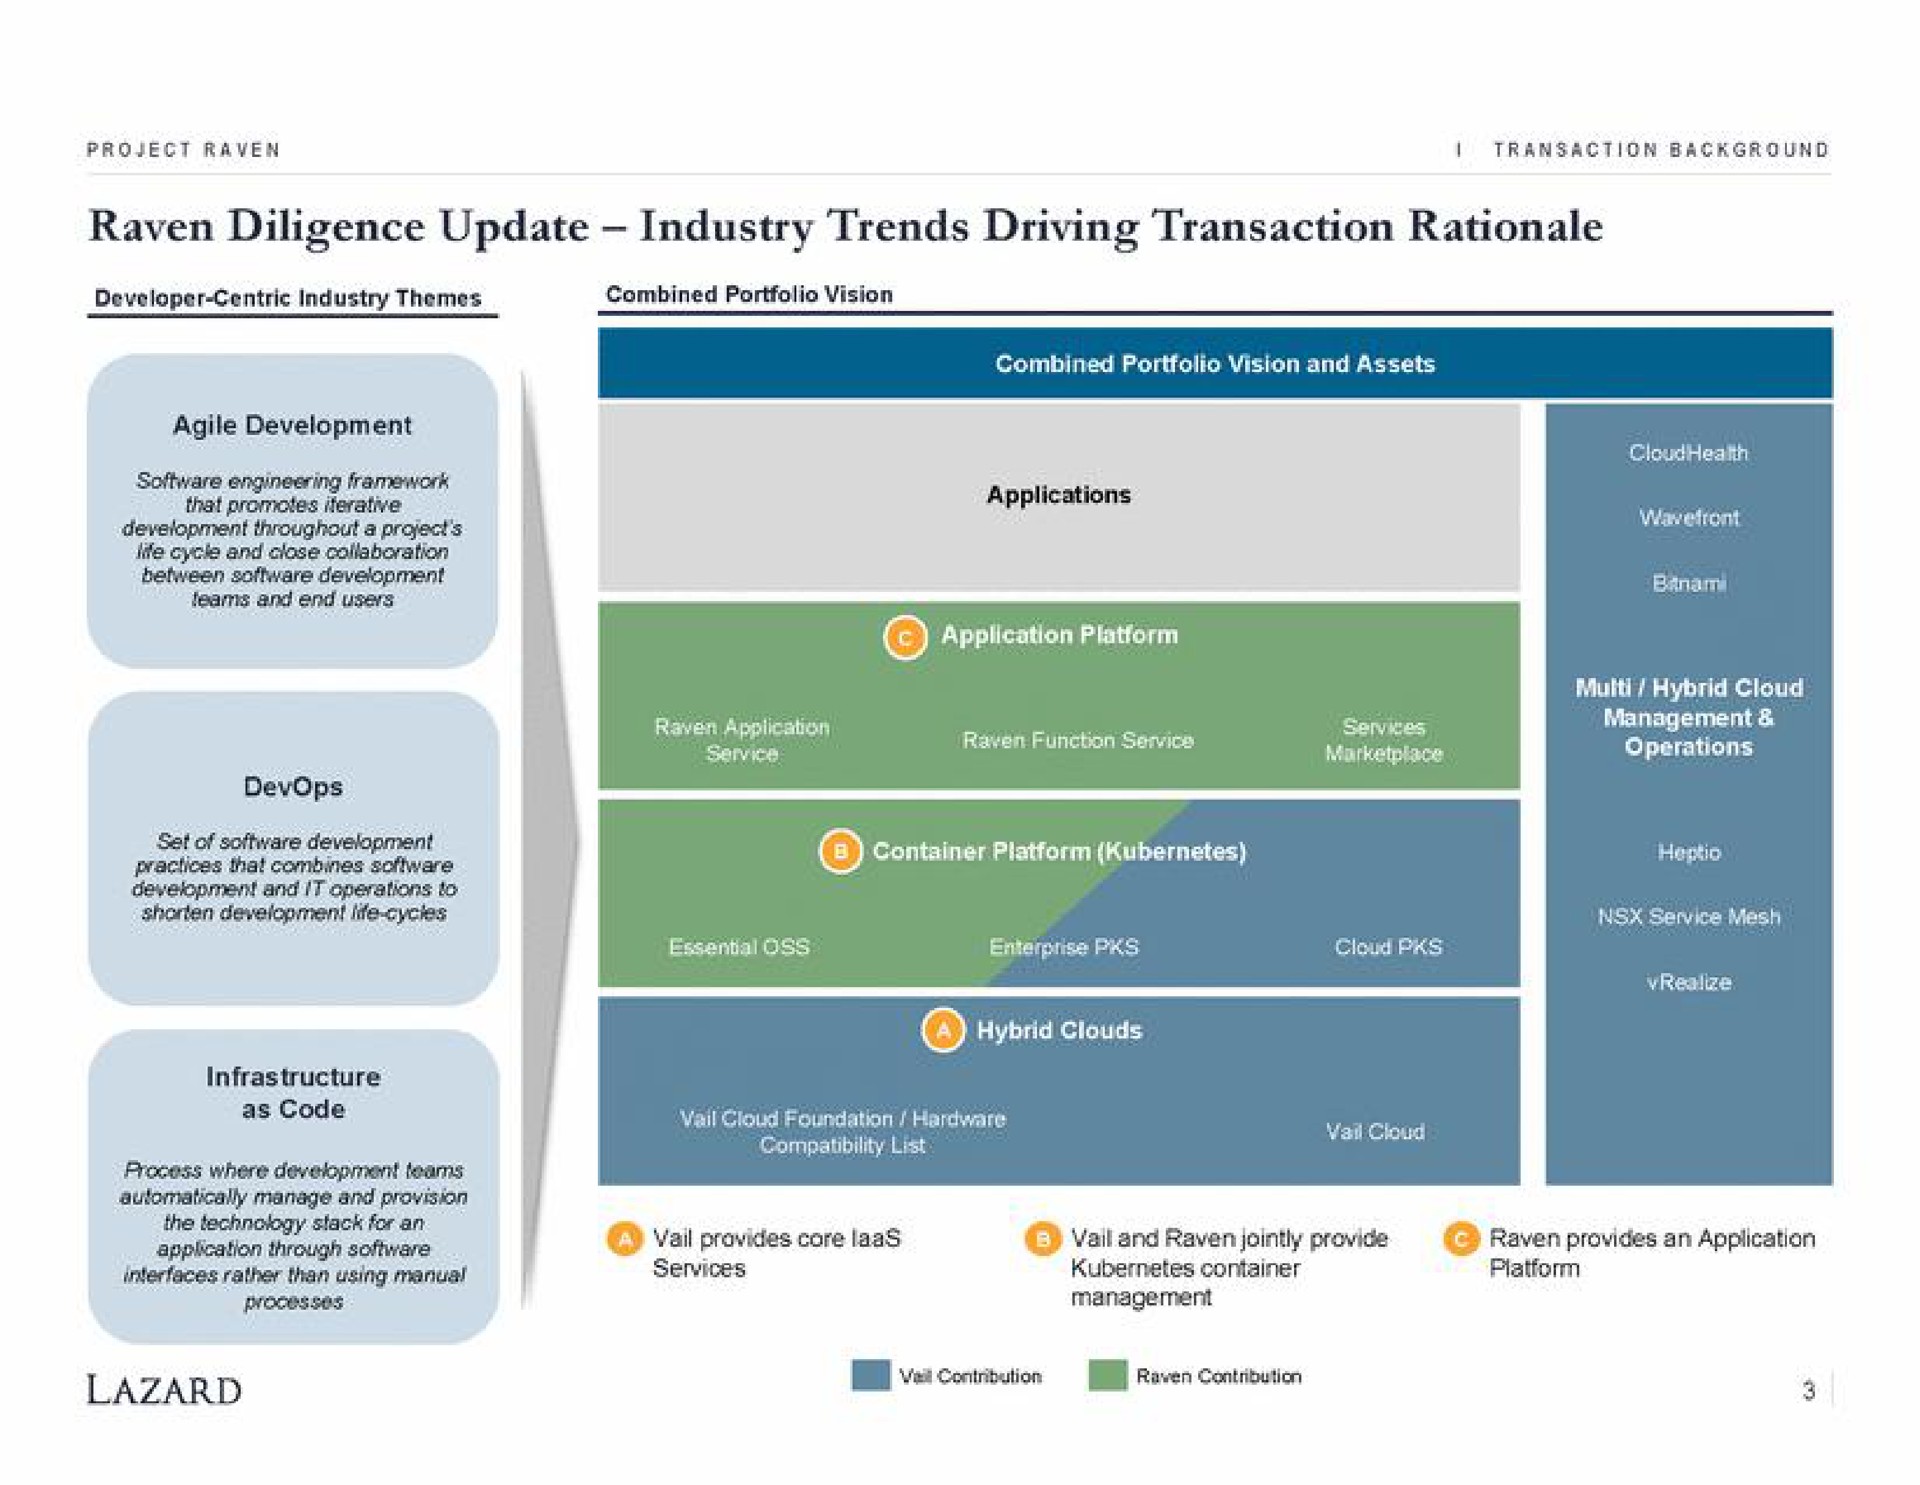 raven diligence update industry trends driving transaction rationale development and it operations to processes management be contribution i raven contribution | Lazard